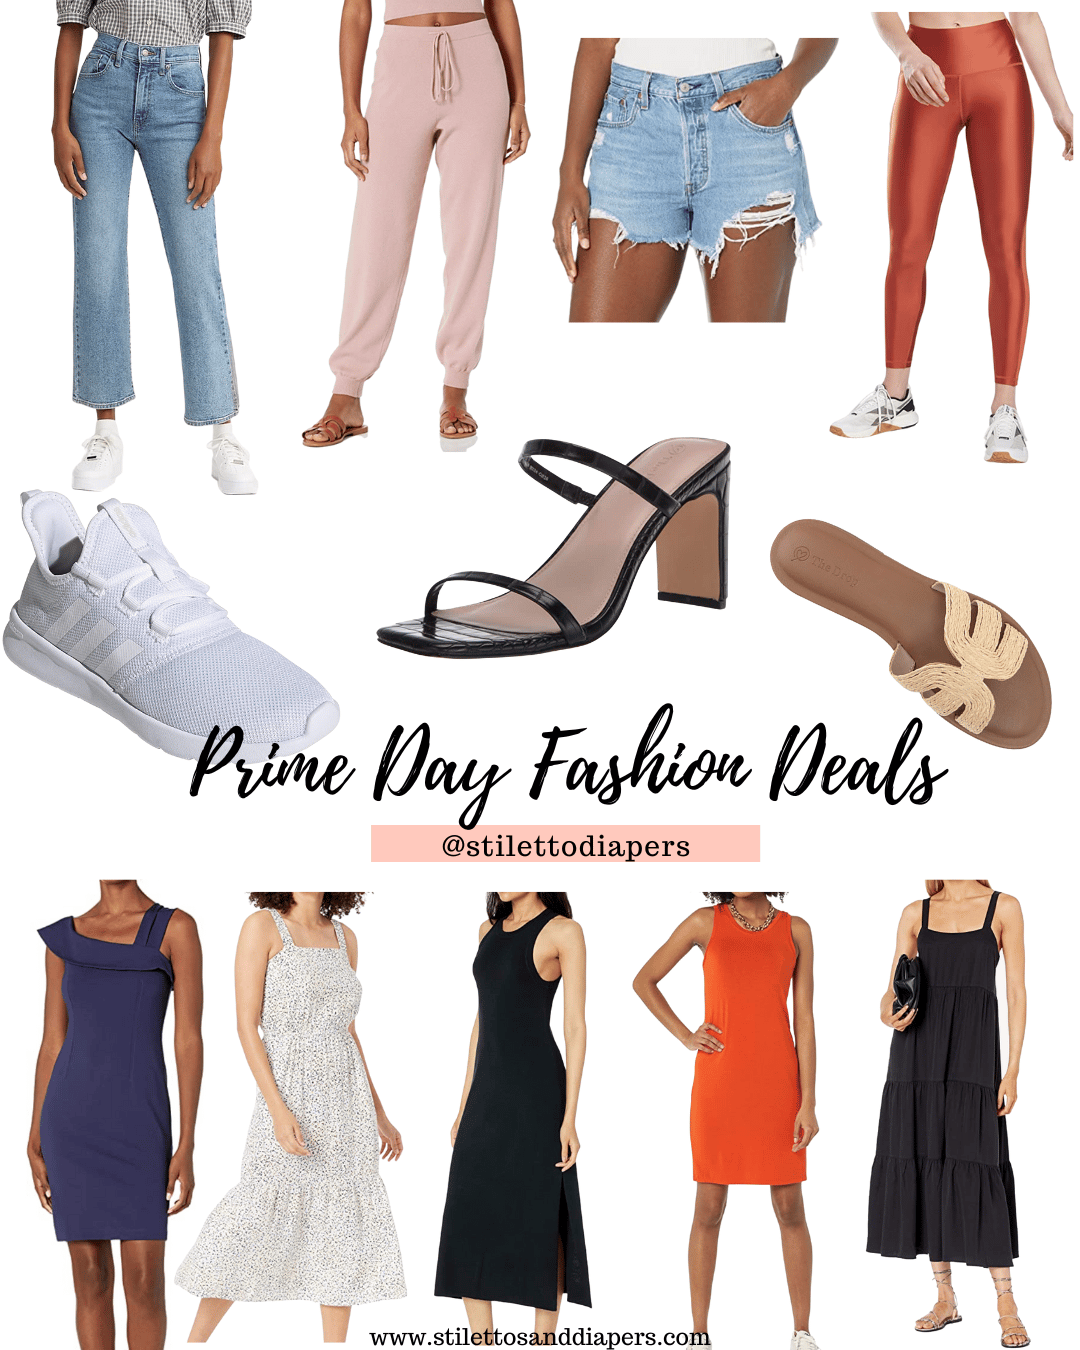 Prime Day Fashion Deals, Best amazon prime day finds, Stilettos and diapers